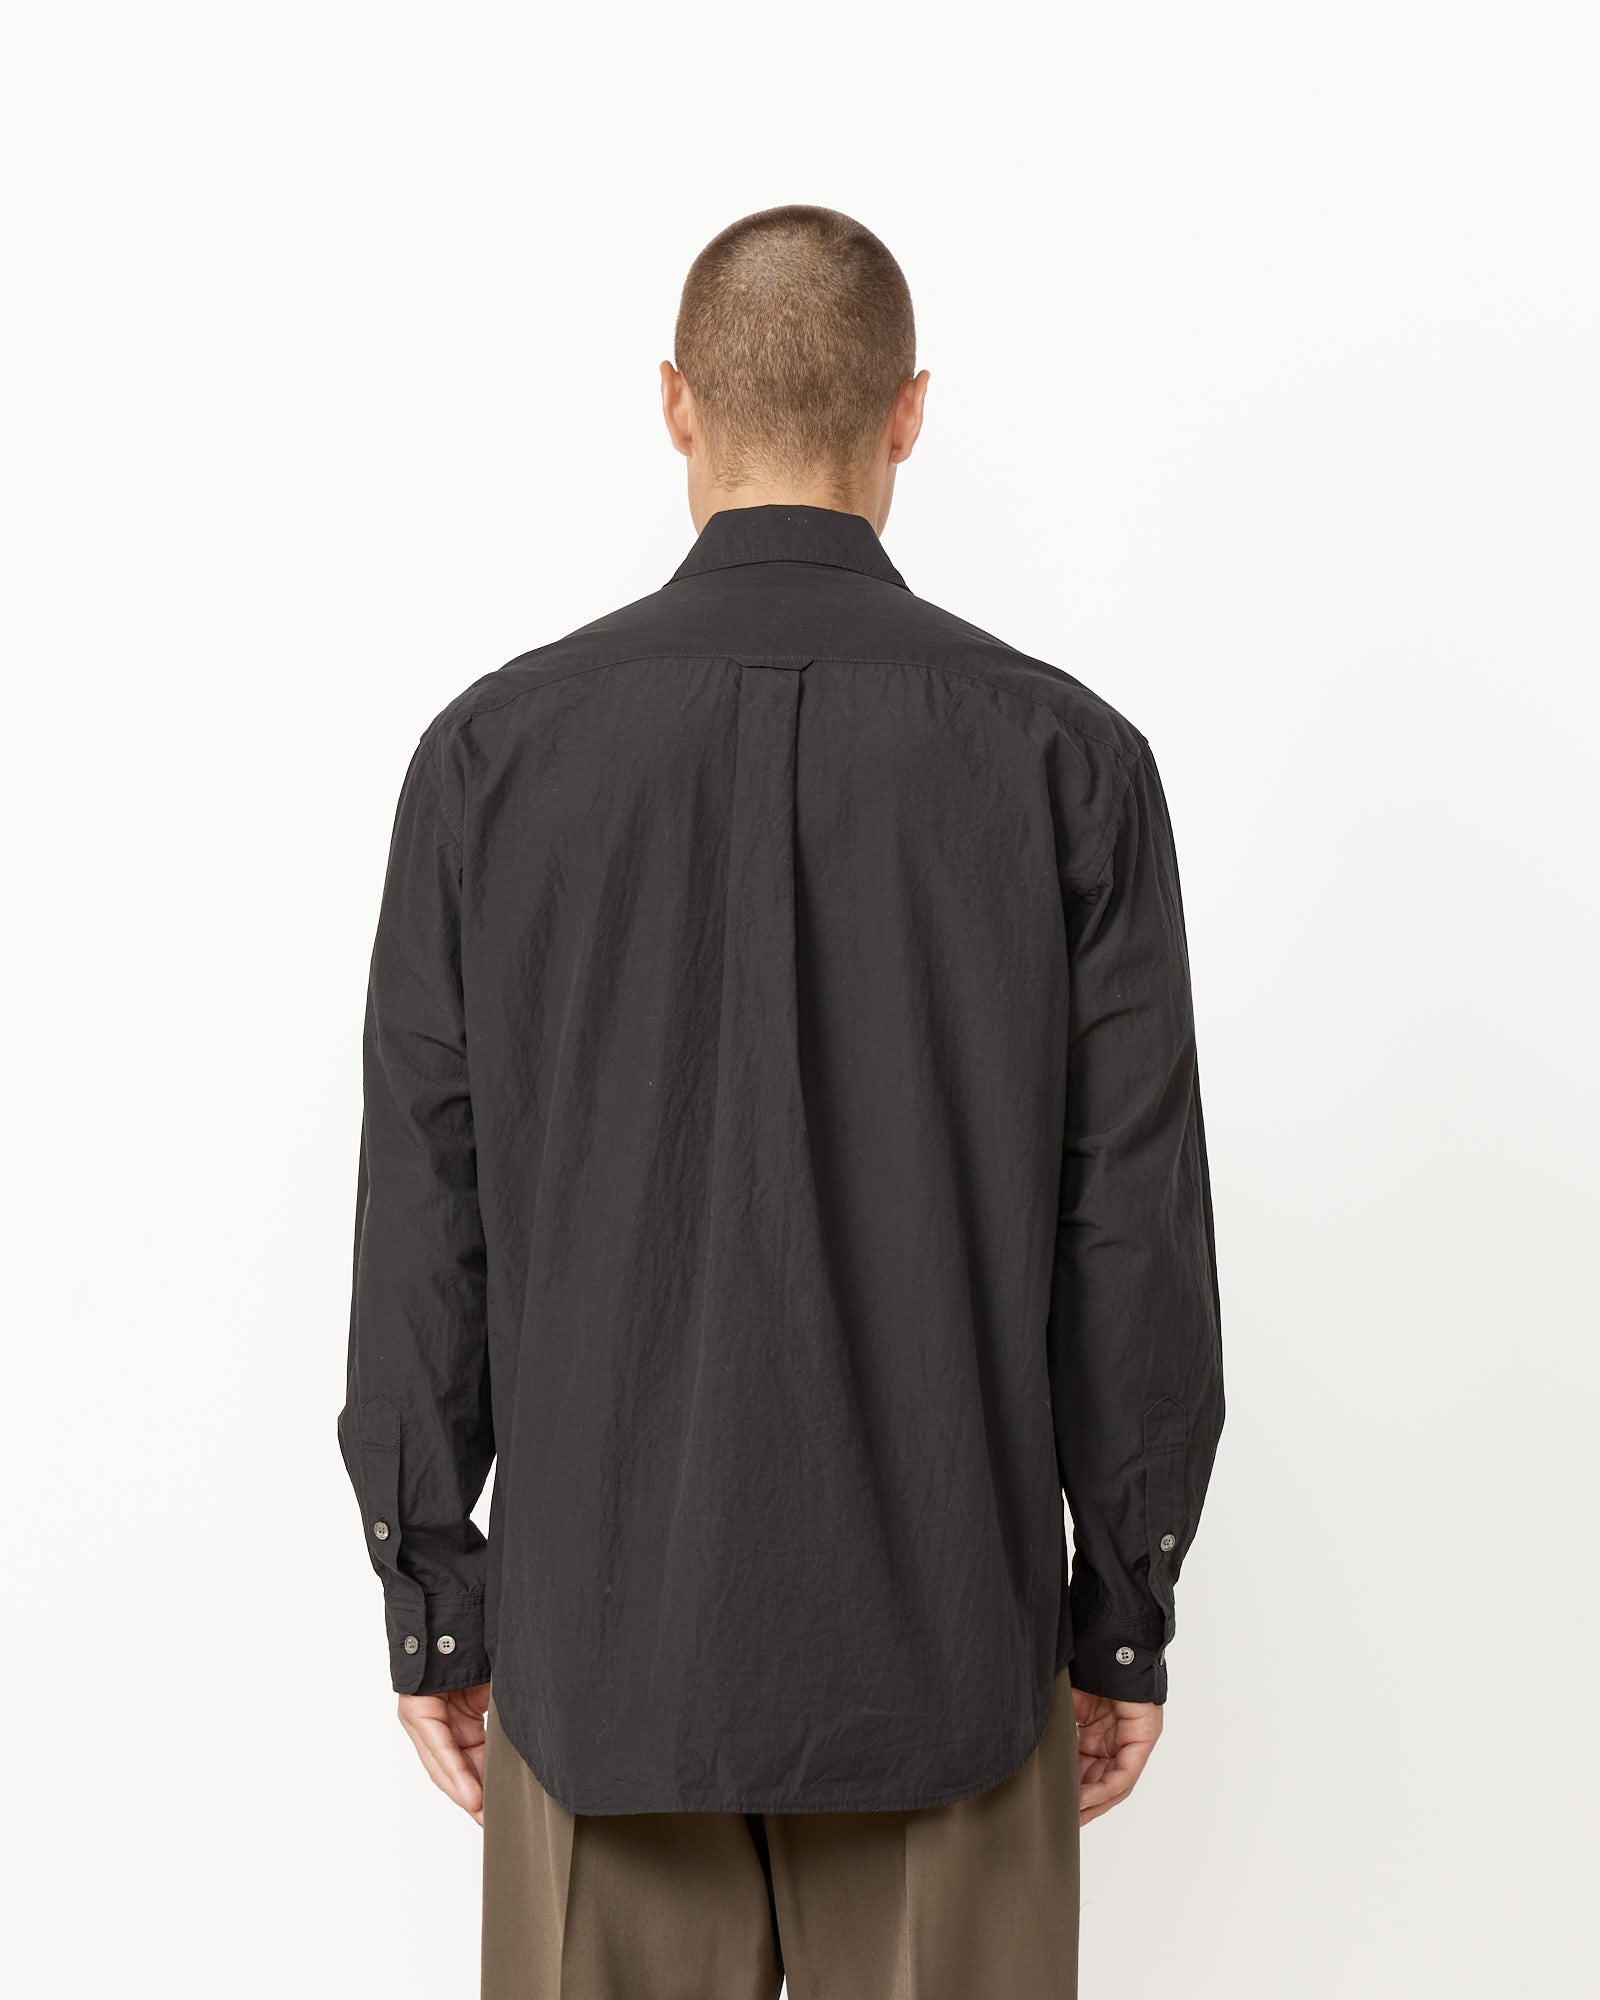 Gio Shirt in Crushed Cotton Black